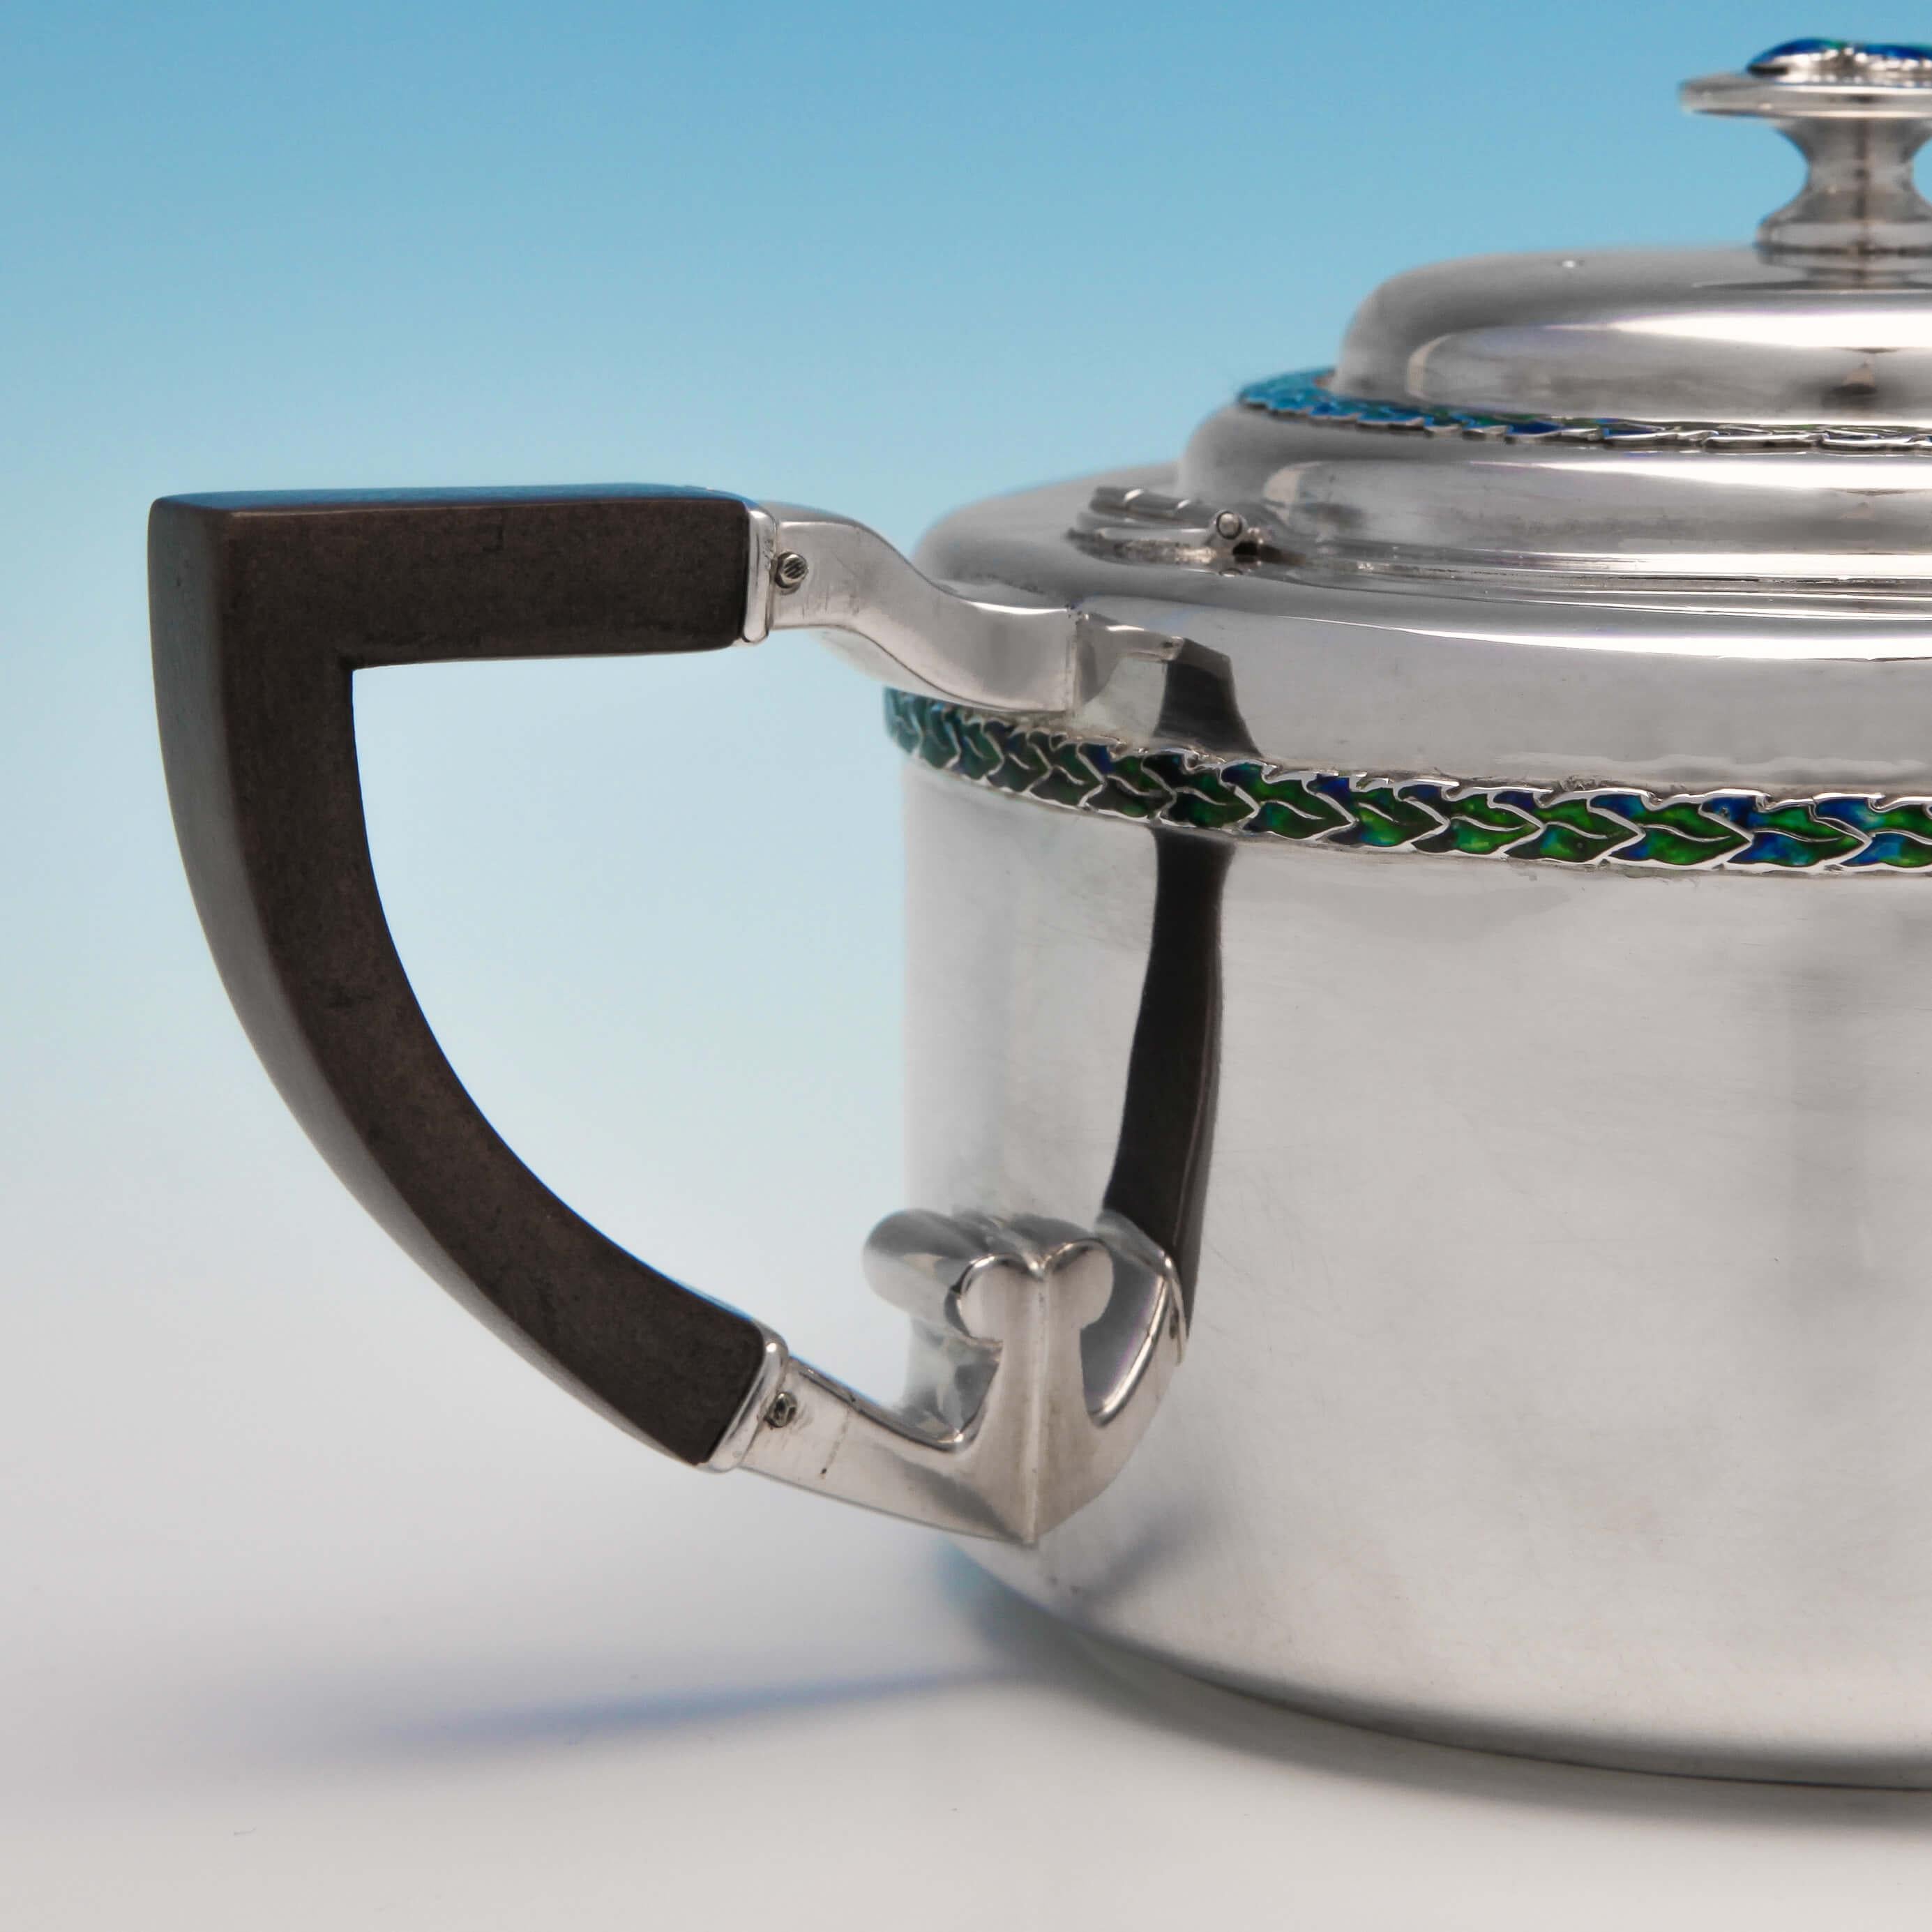 Hallmarked in Birmingham in 1909 by Liberty & Co. This exquisite Edwardian, antique, sterling silver teapot is in the Arts & Crafts style. It has been embellished with two bands of enamel and an enameled finial in the Classic liberty blue and green